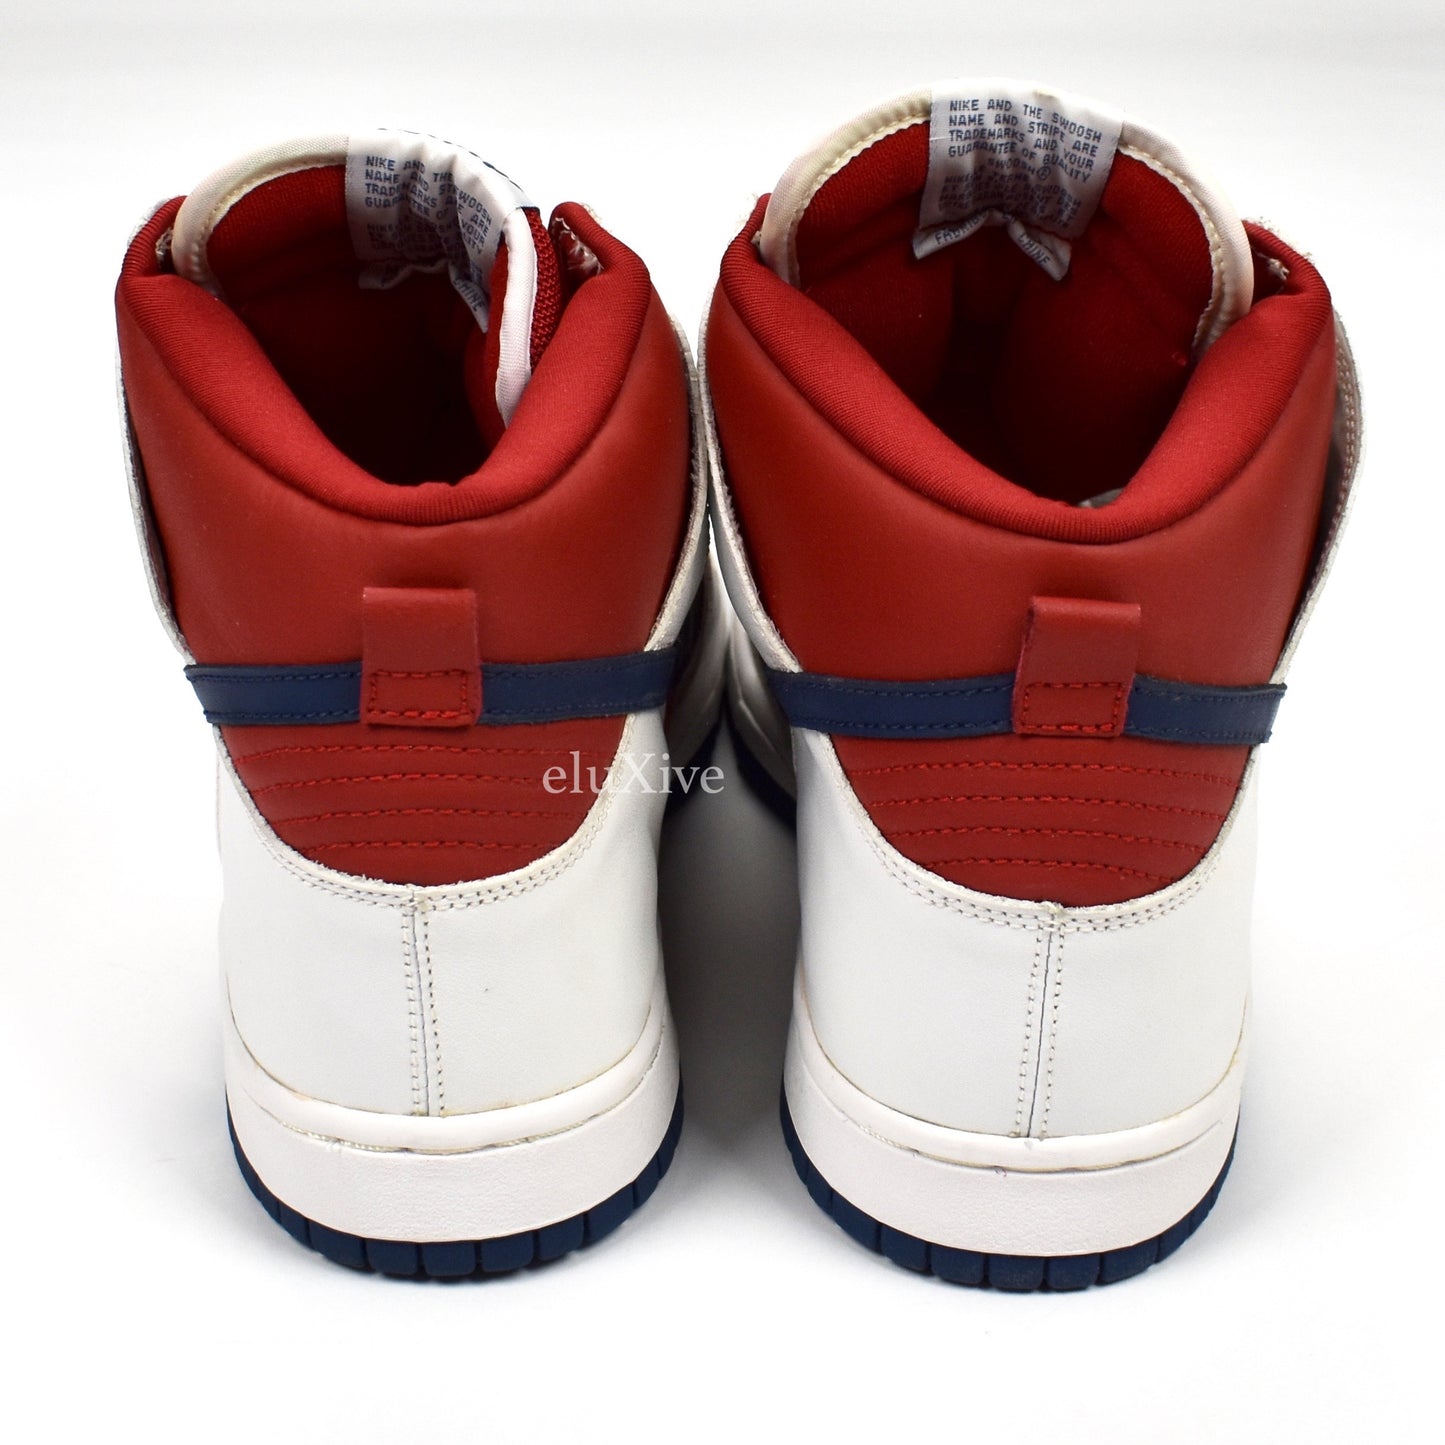 Nike - 2002 Dunk High 'Clippers' (Red/White/Blue)